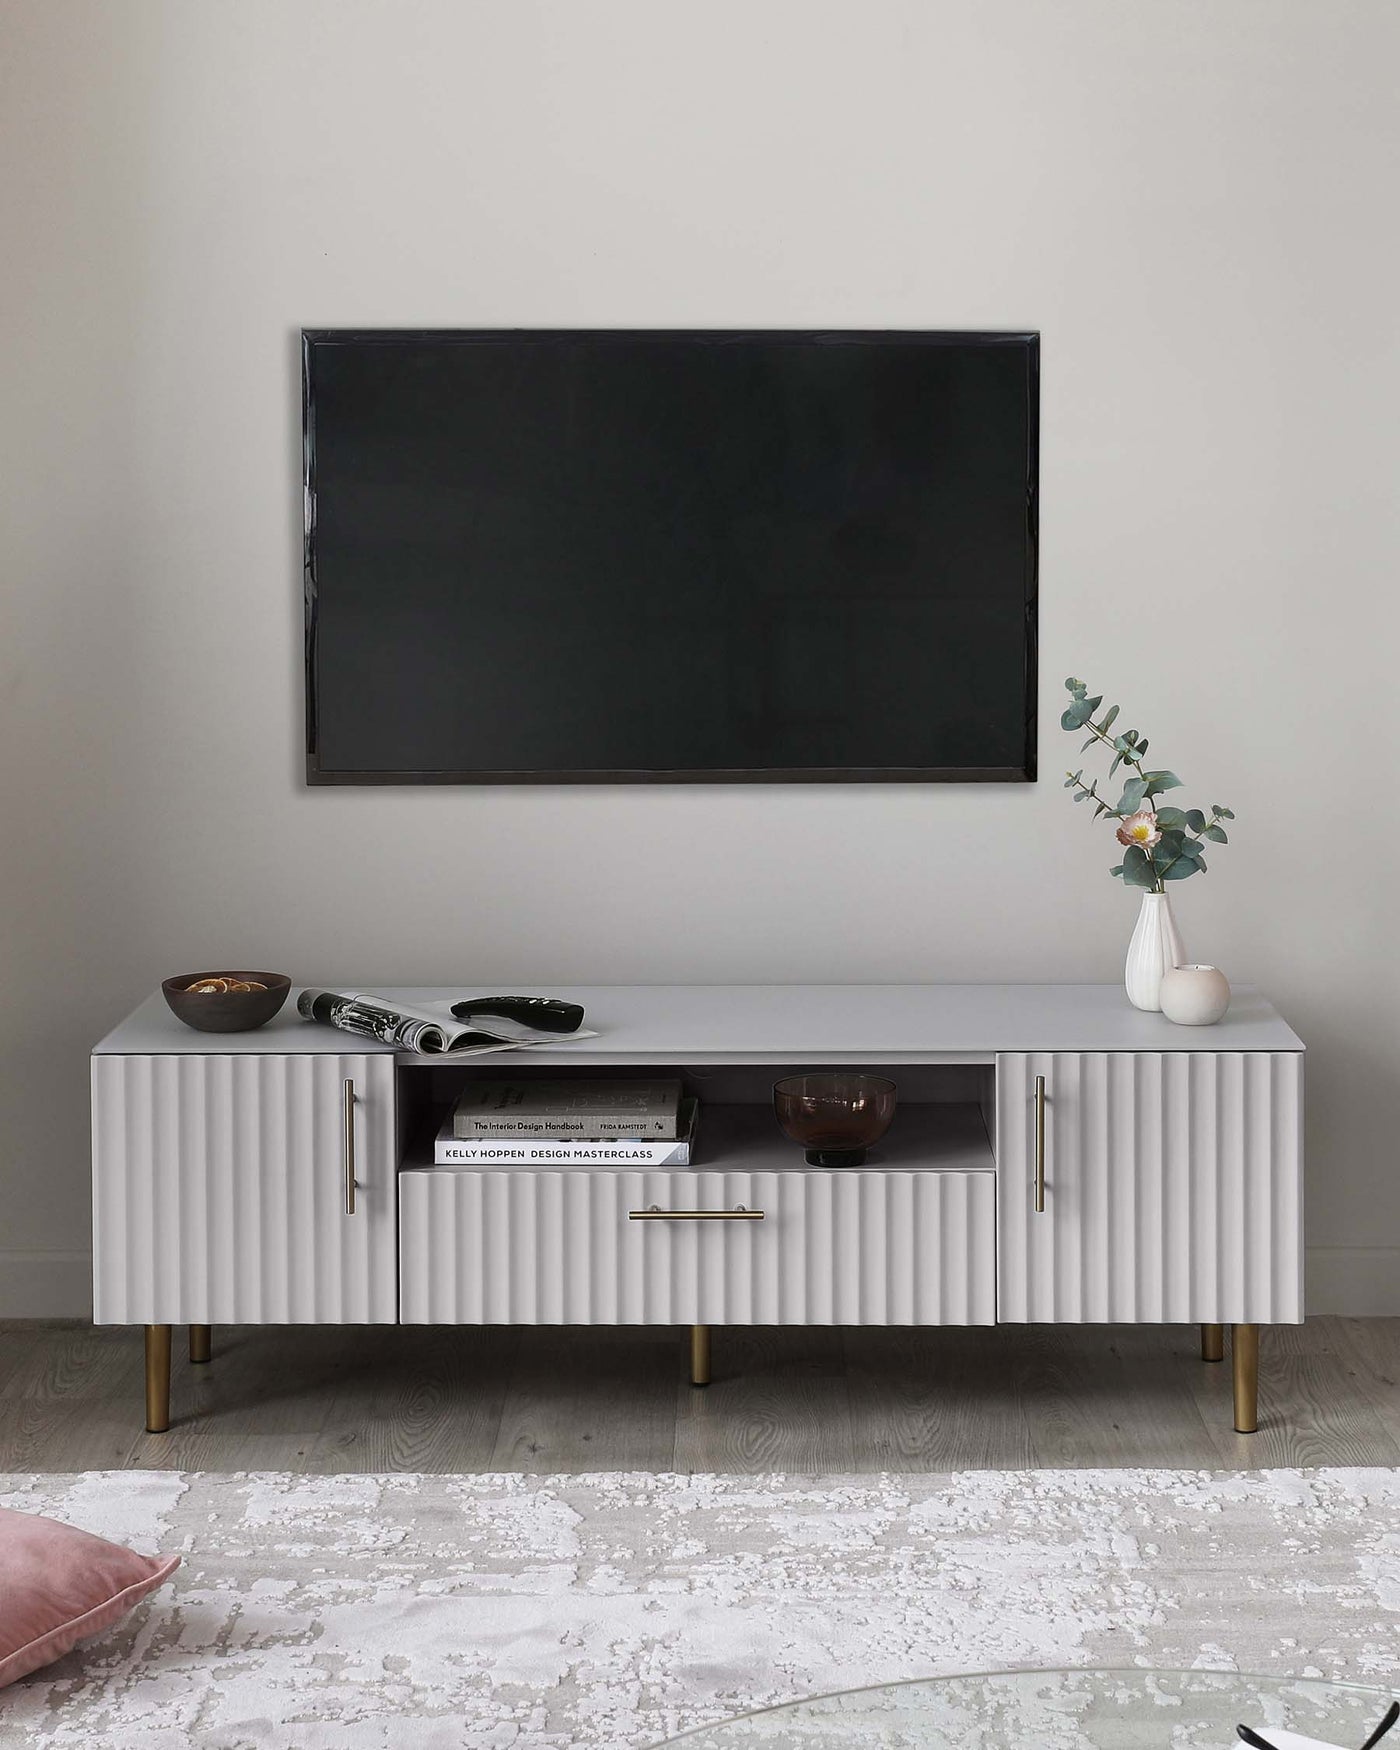 A contemporary white sideboard with a textured front, gold handles, and tapered wooden legs. The sideboard has two cabinet doors and a central shelf housing decorative items, positioned below a wall-mounted television, flanked by ornamental plant and books. A patterned light grey and white area rug is partially visible beneath it.